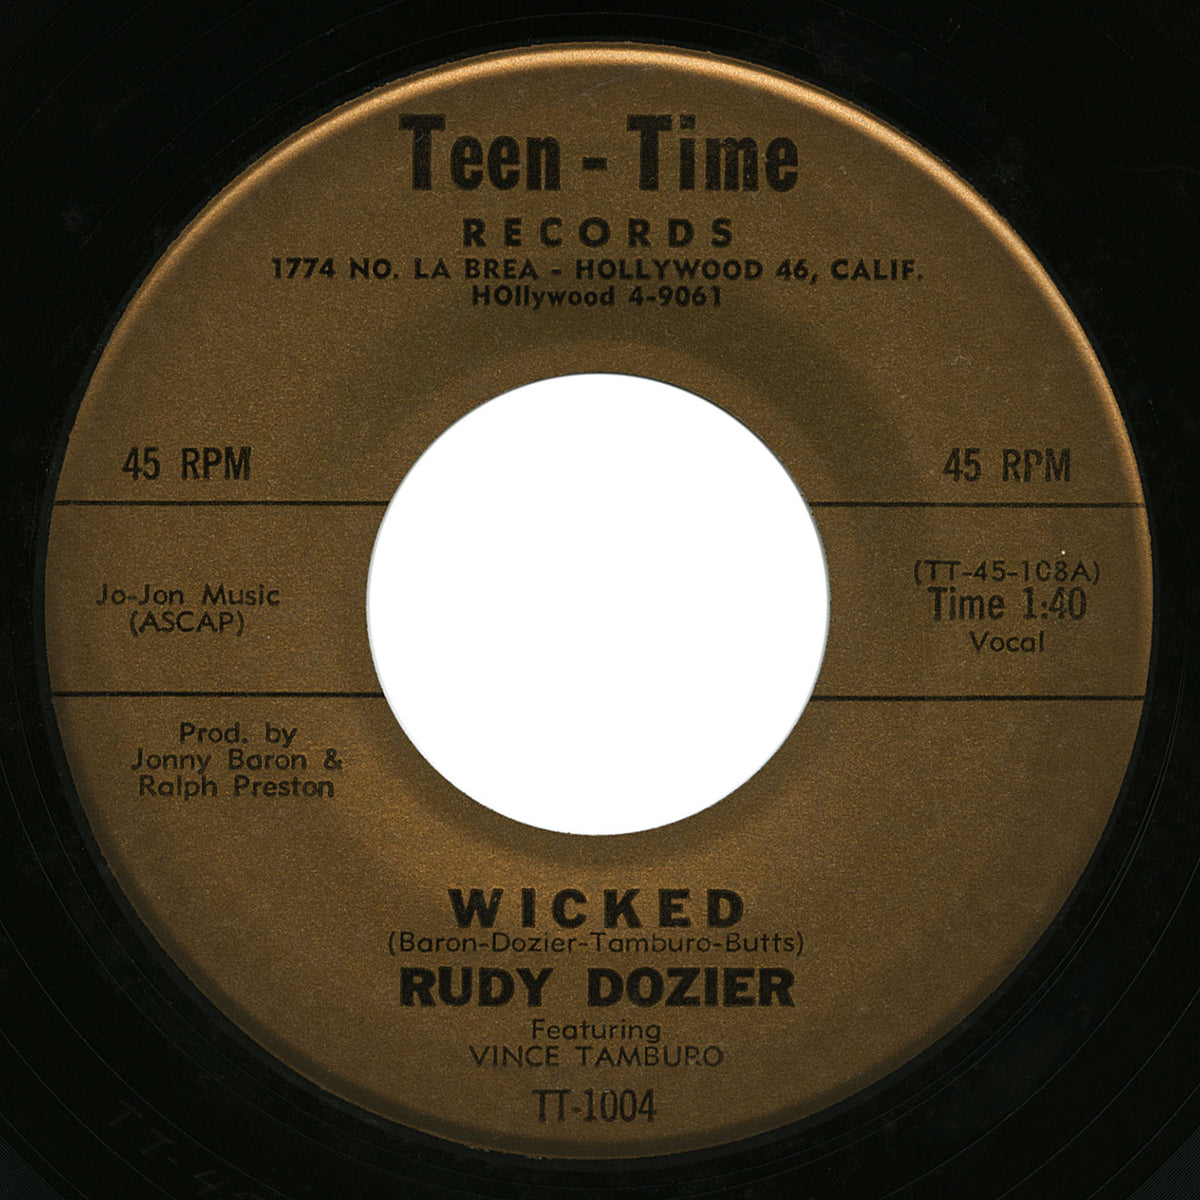 Rudy Dozier – Wicked – Teen Time